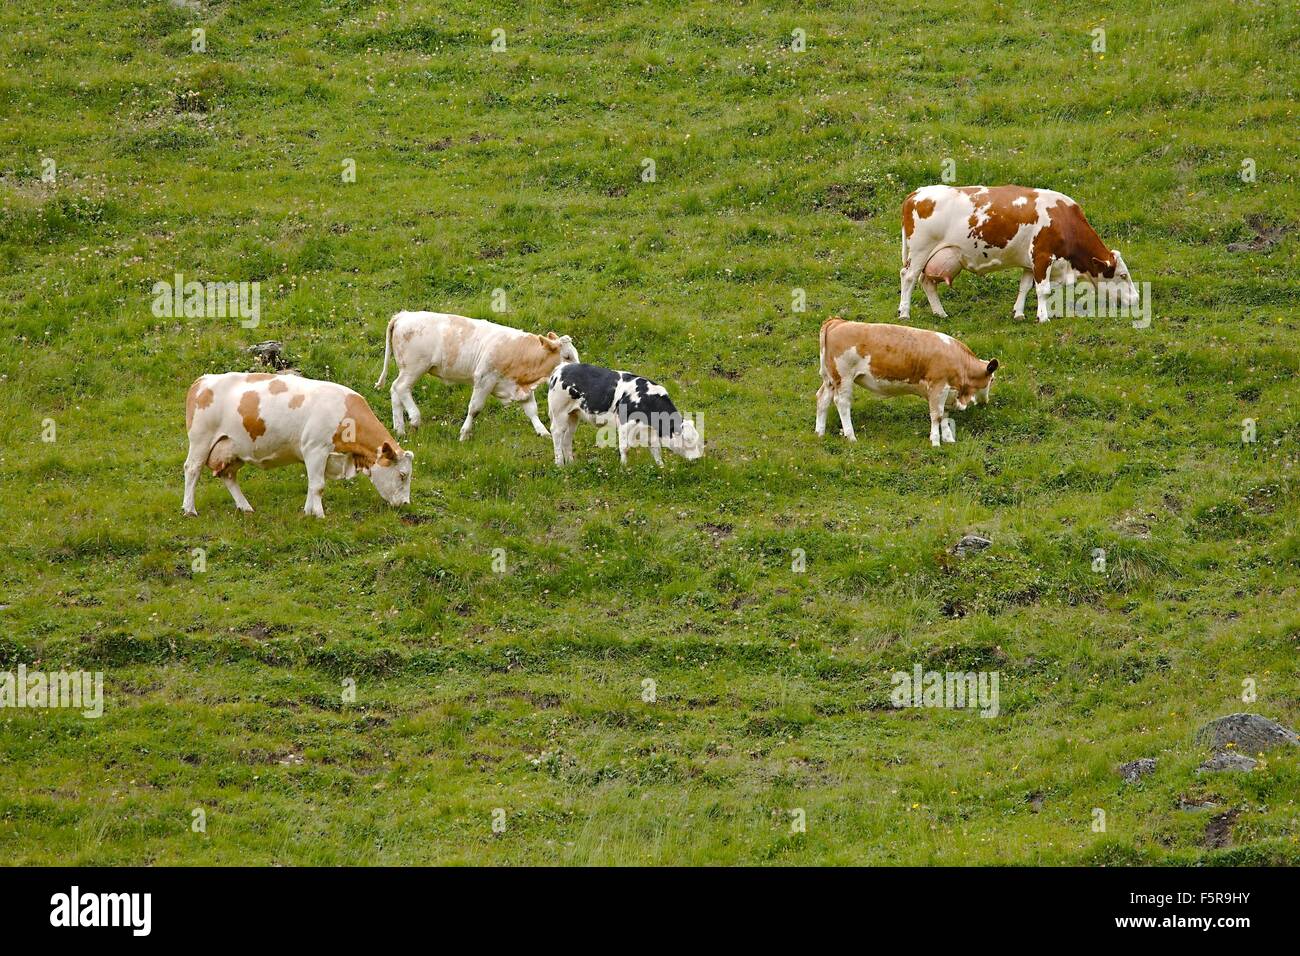 Cows grazing on the hillside Stock Photo